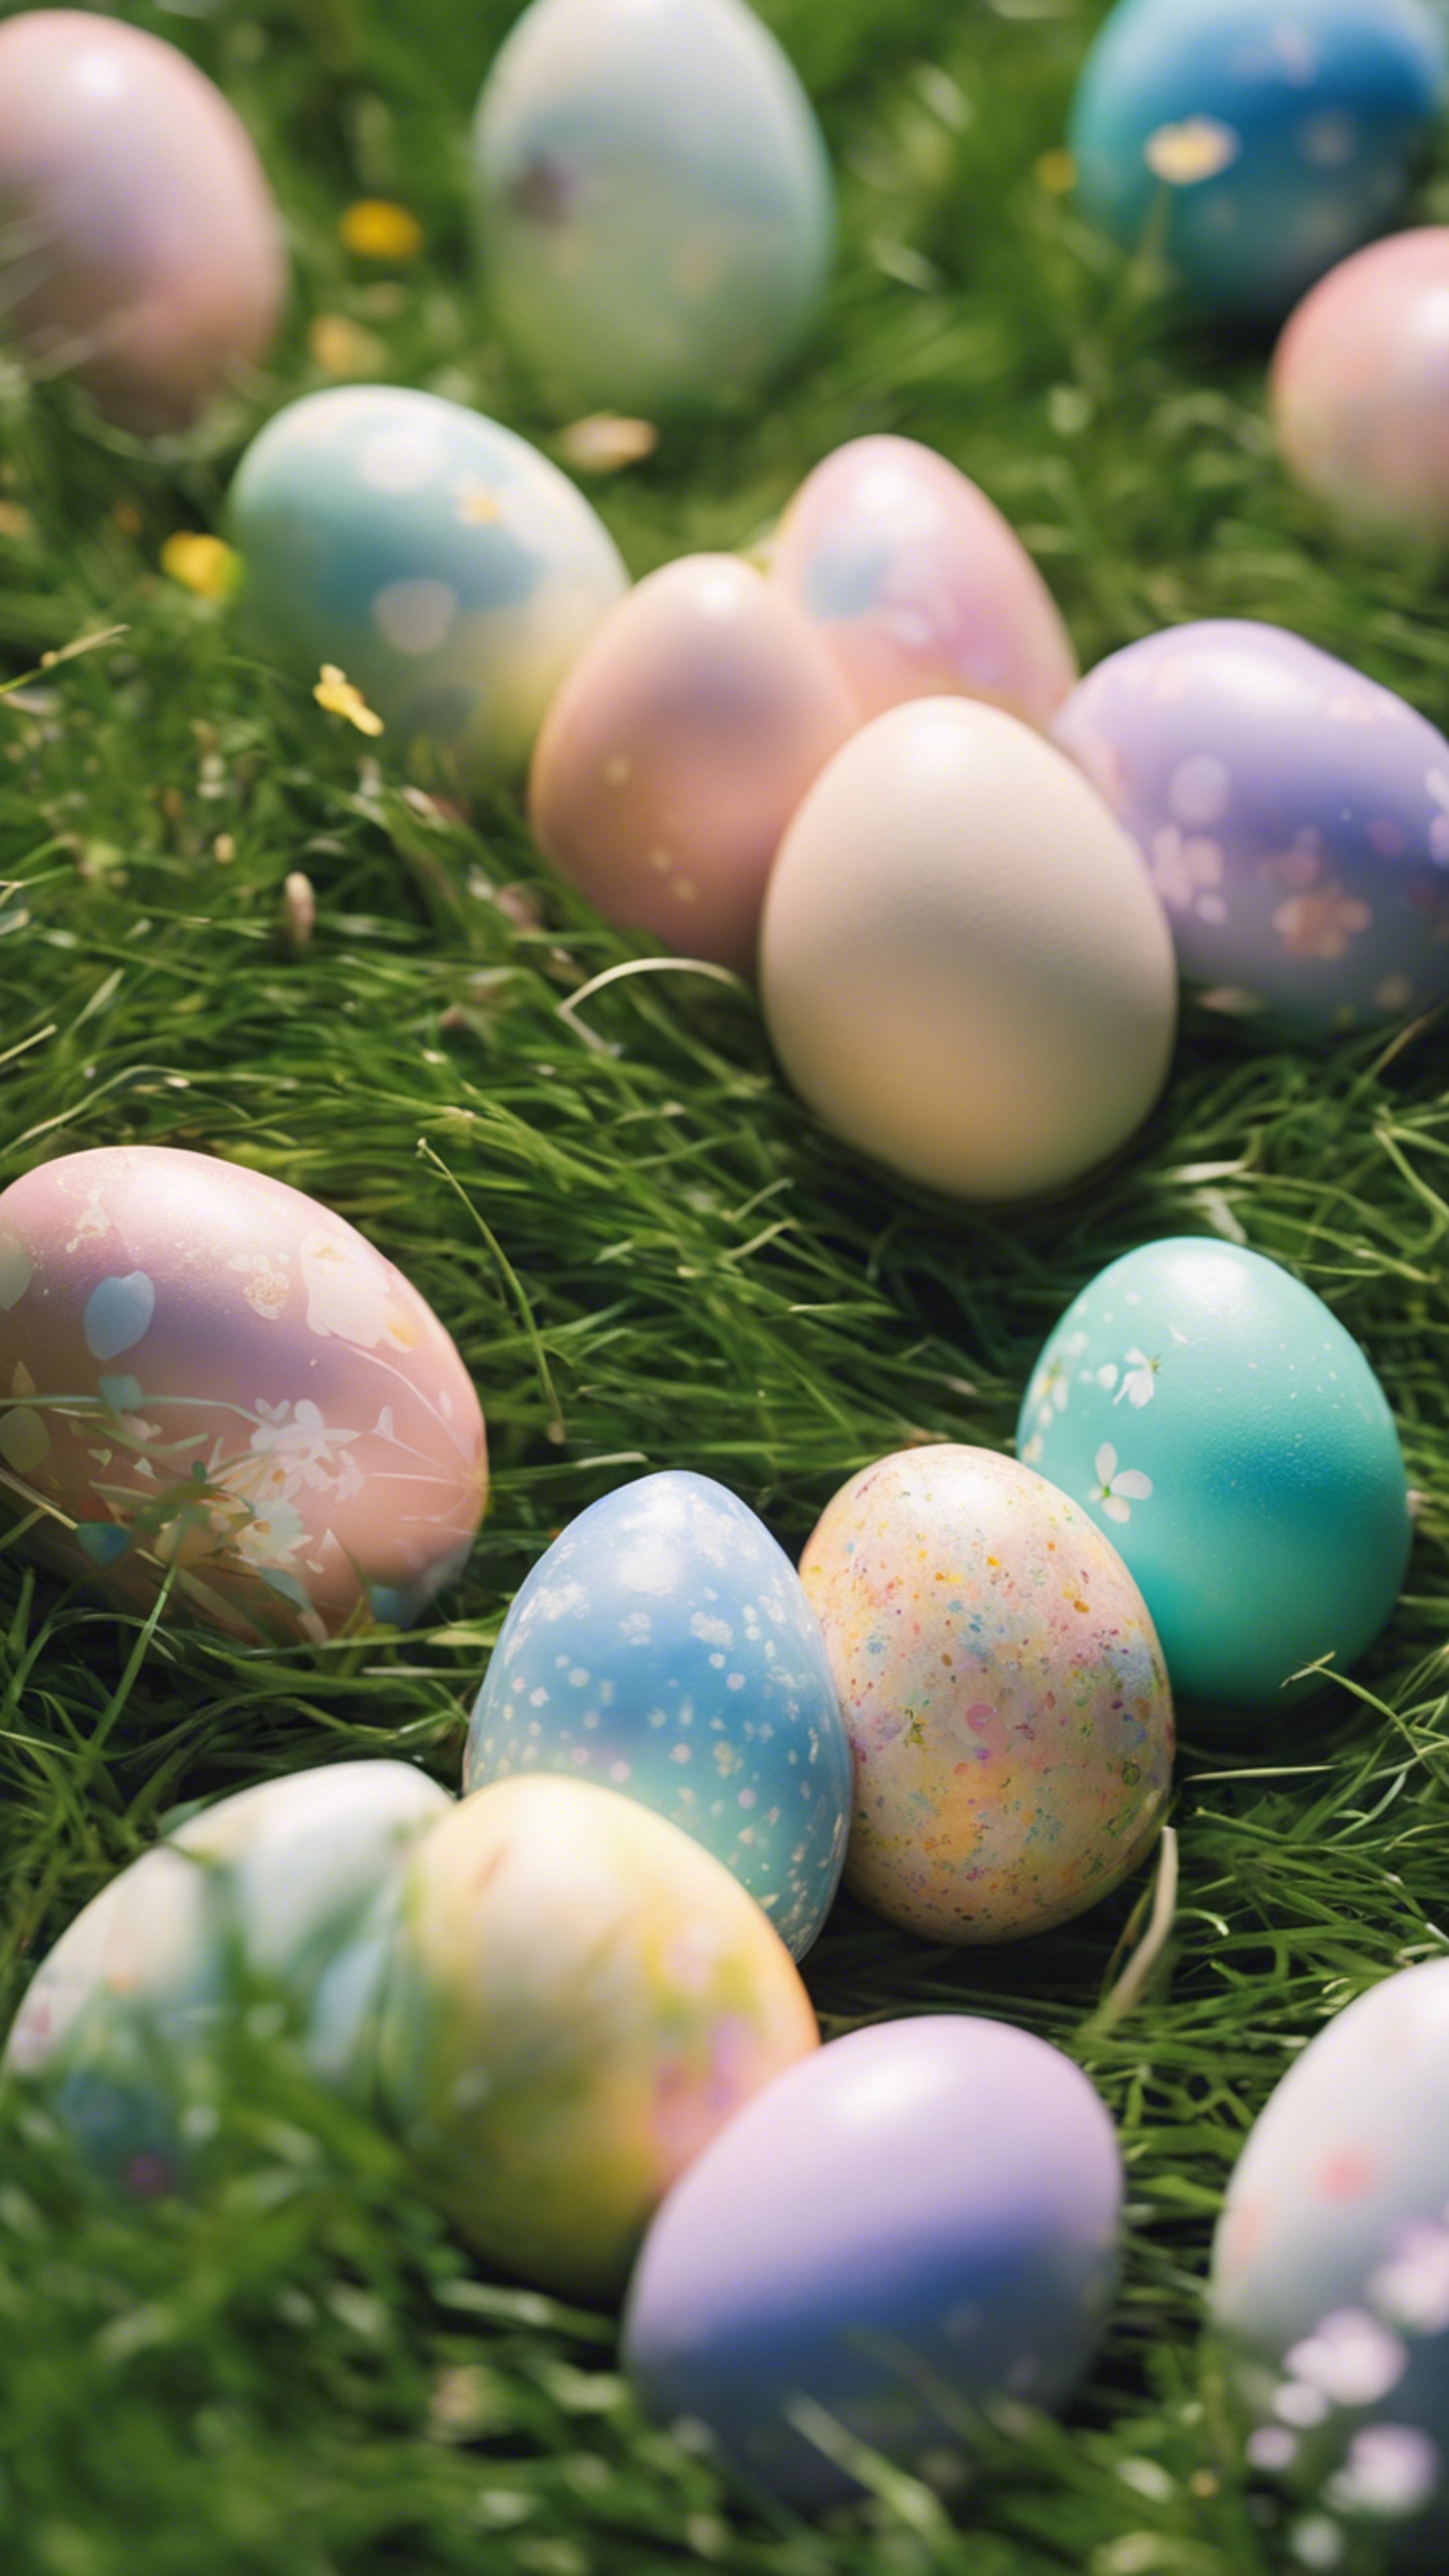 Hand-held prism distorting an image of pastel Easter eggs lined on a grass patch.壁紙[c275e60f6e1f4099a863]